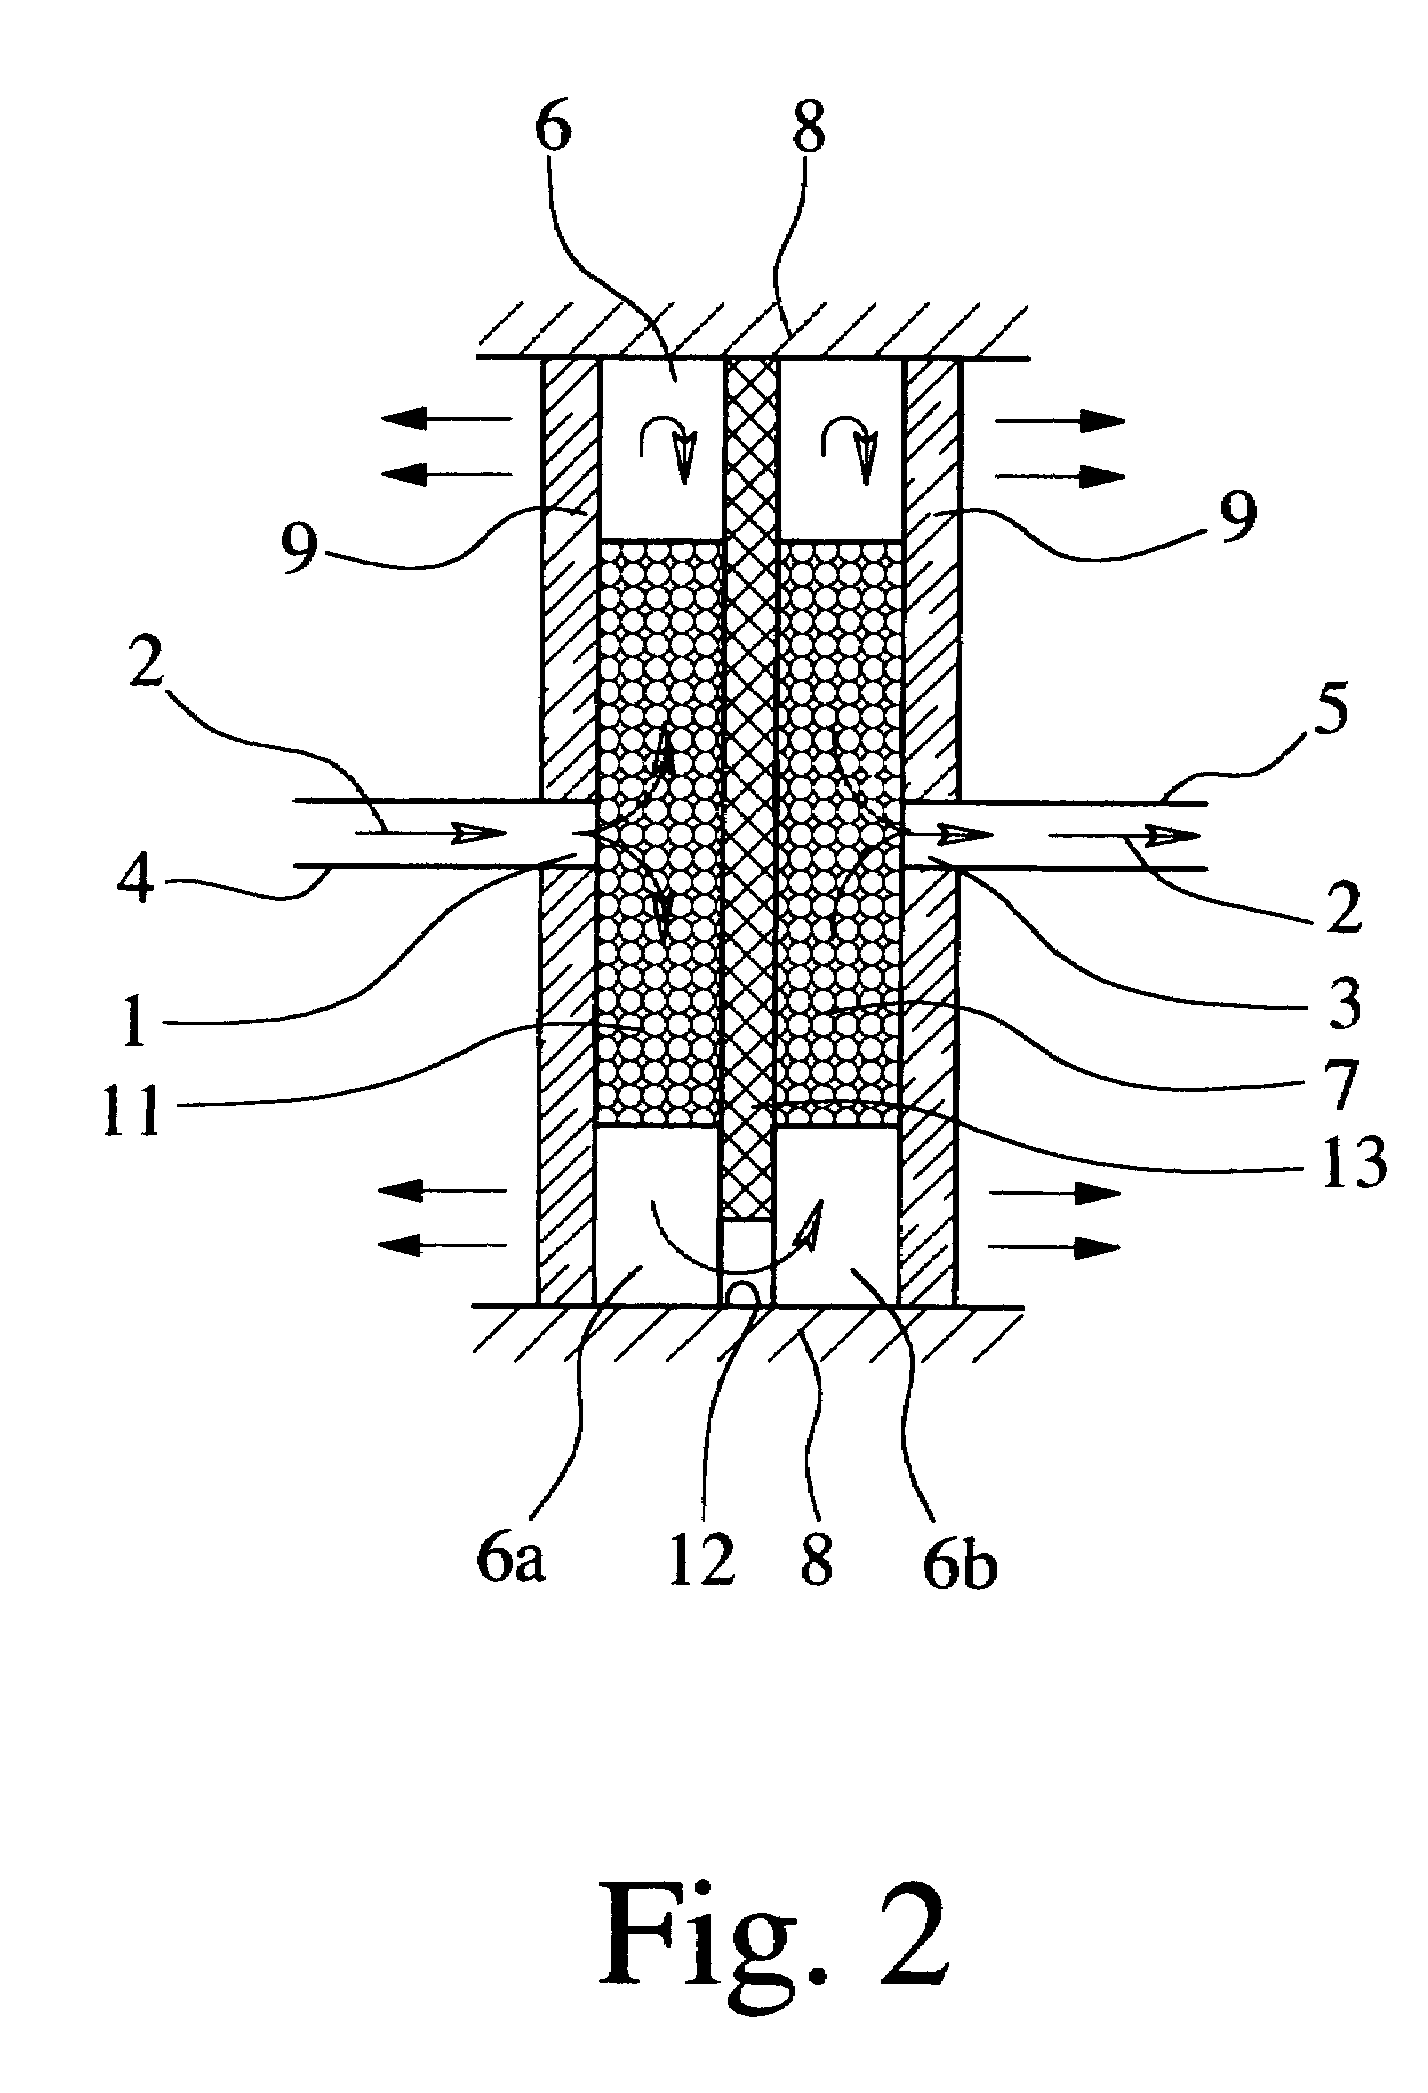 Process and device for separating and exhausting gas bubbles from liquids